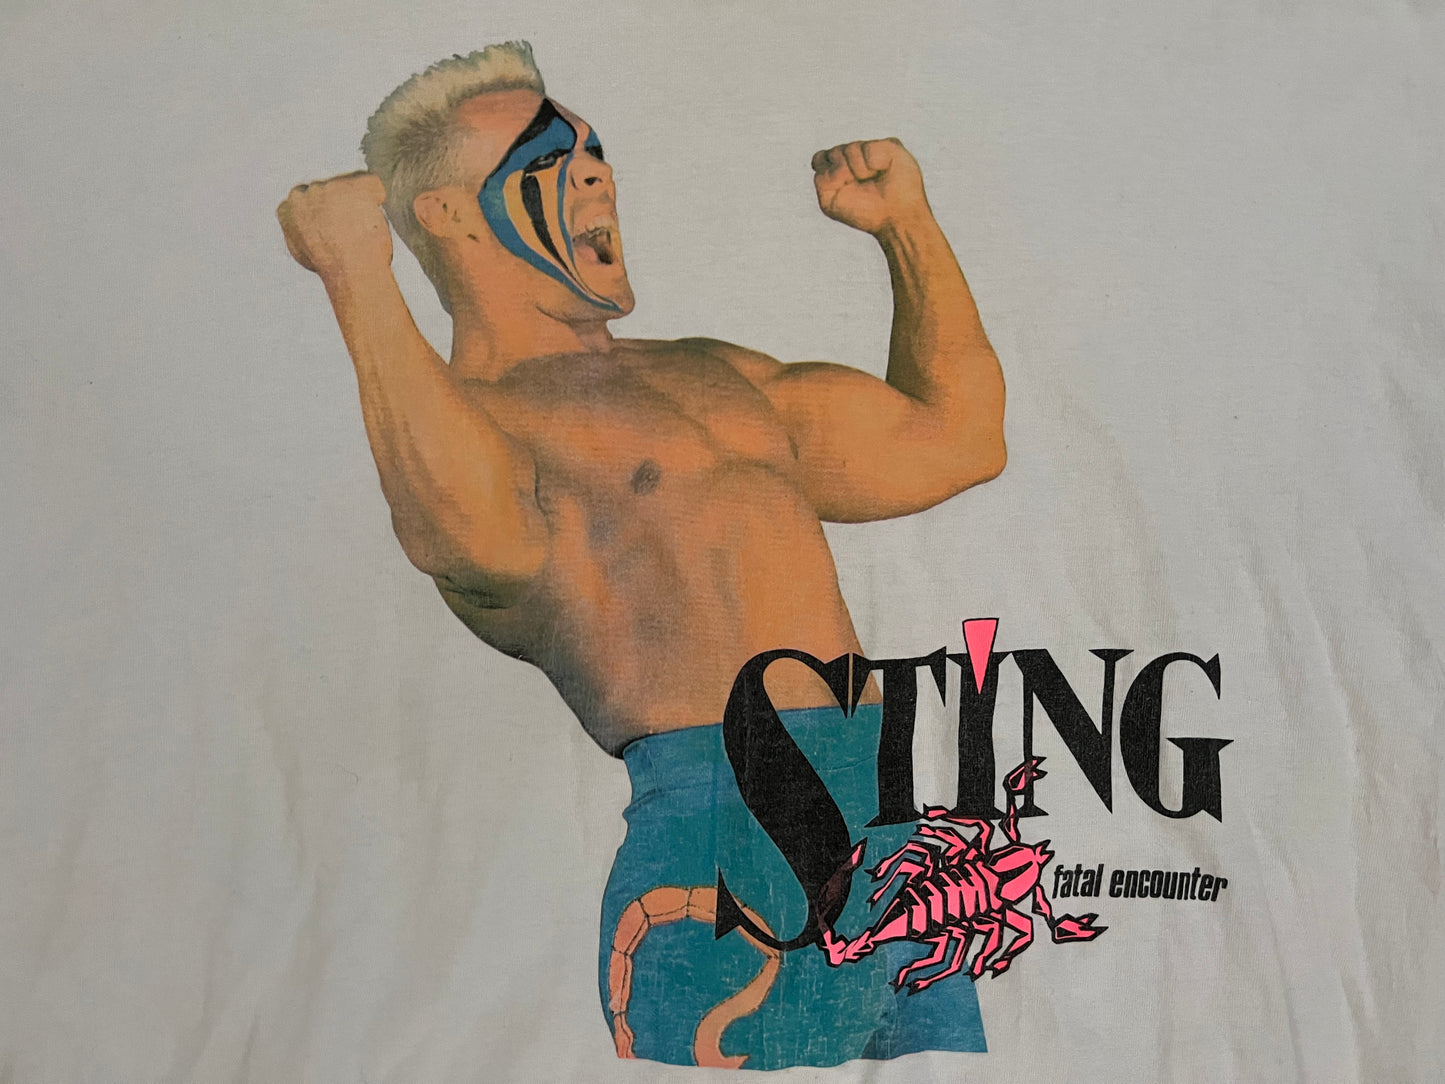 1990 WCW Sting “Fatal Encounter” two sided shirt with the WCW Logo on the back